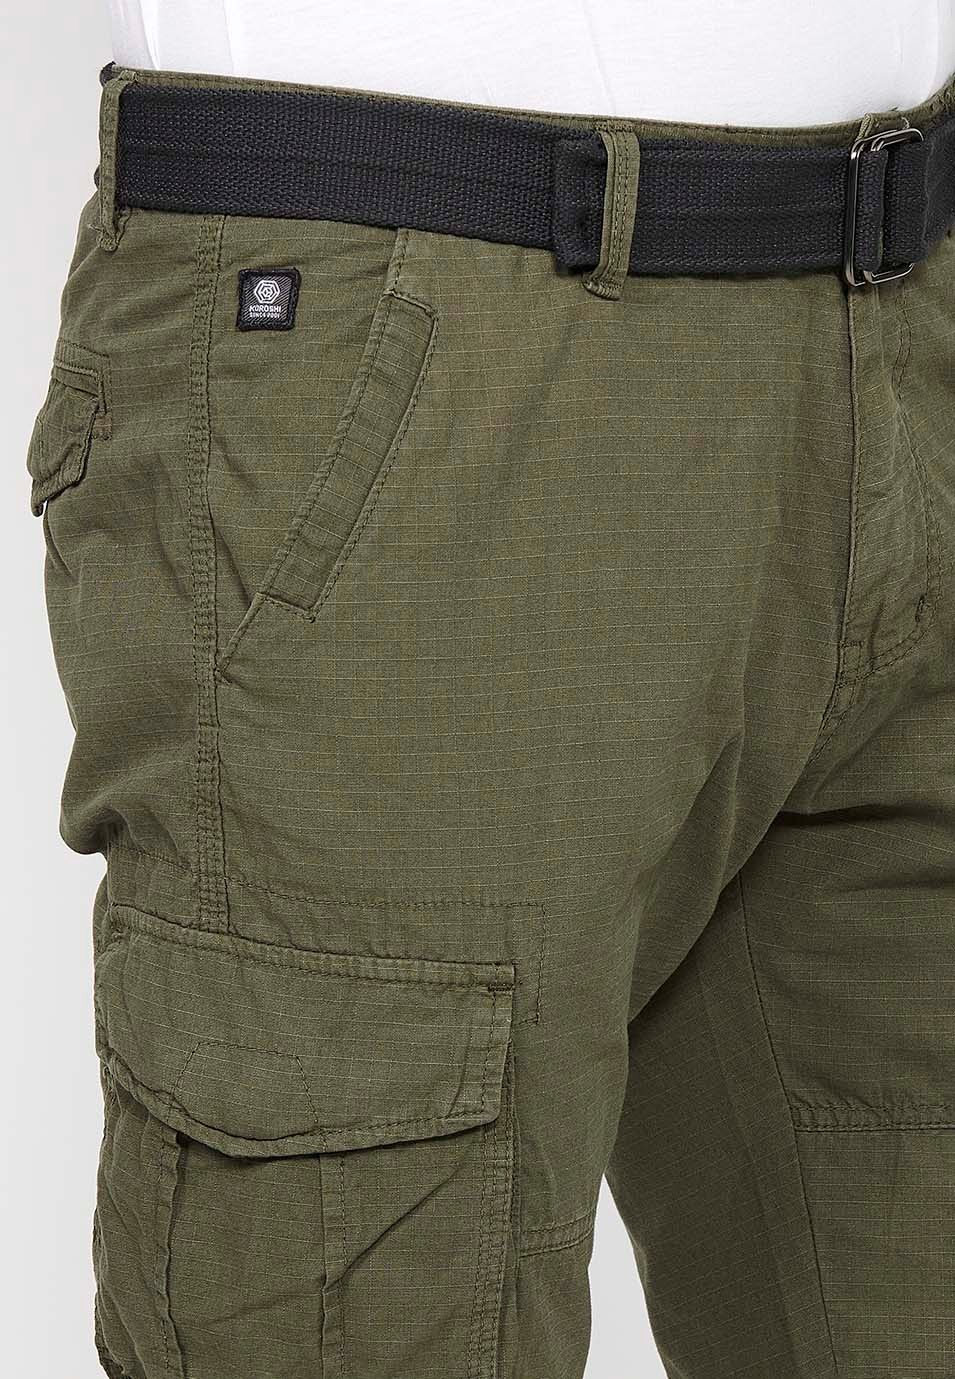 Cotton cargo shorts with belt and front closure with zipper and button with pockets, two back pockets with flap and two green cargo pants for Men 9